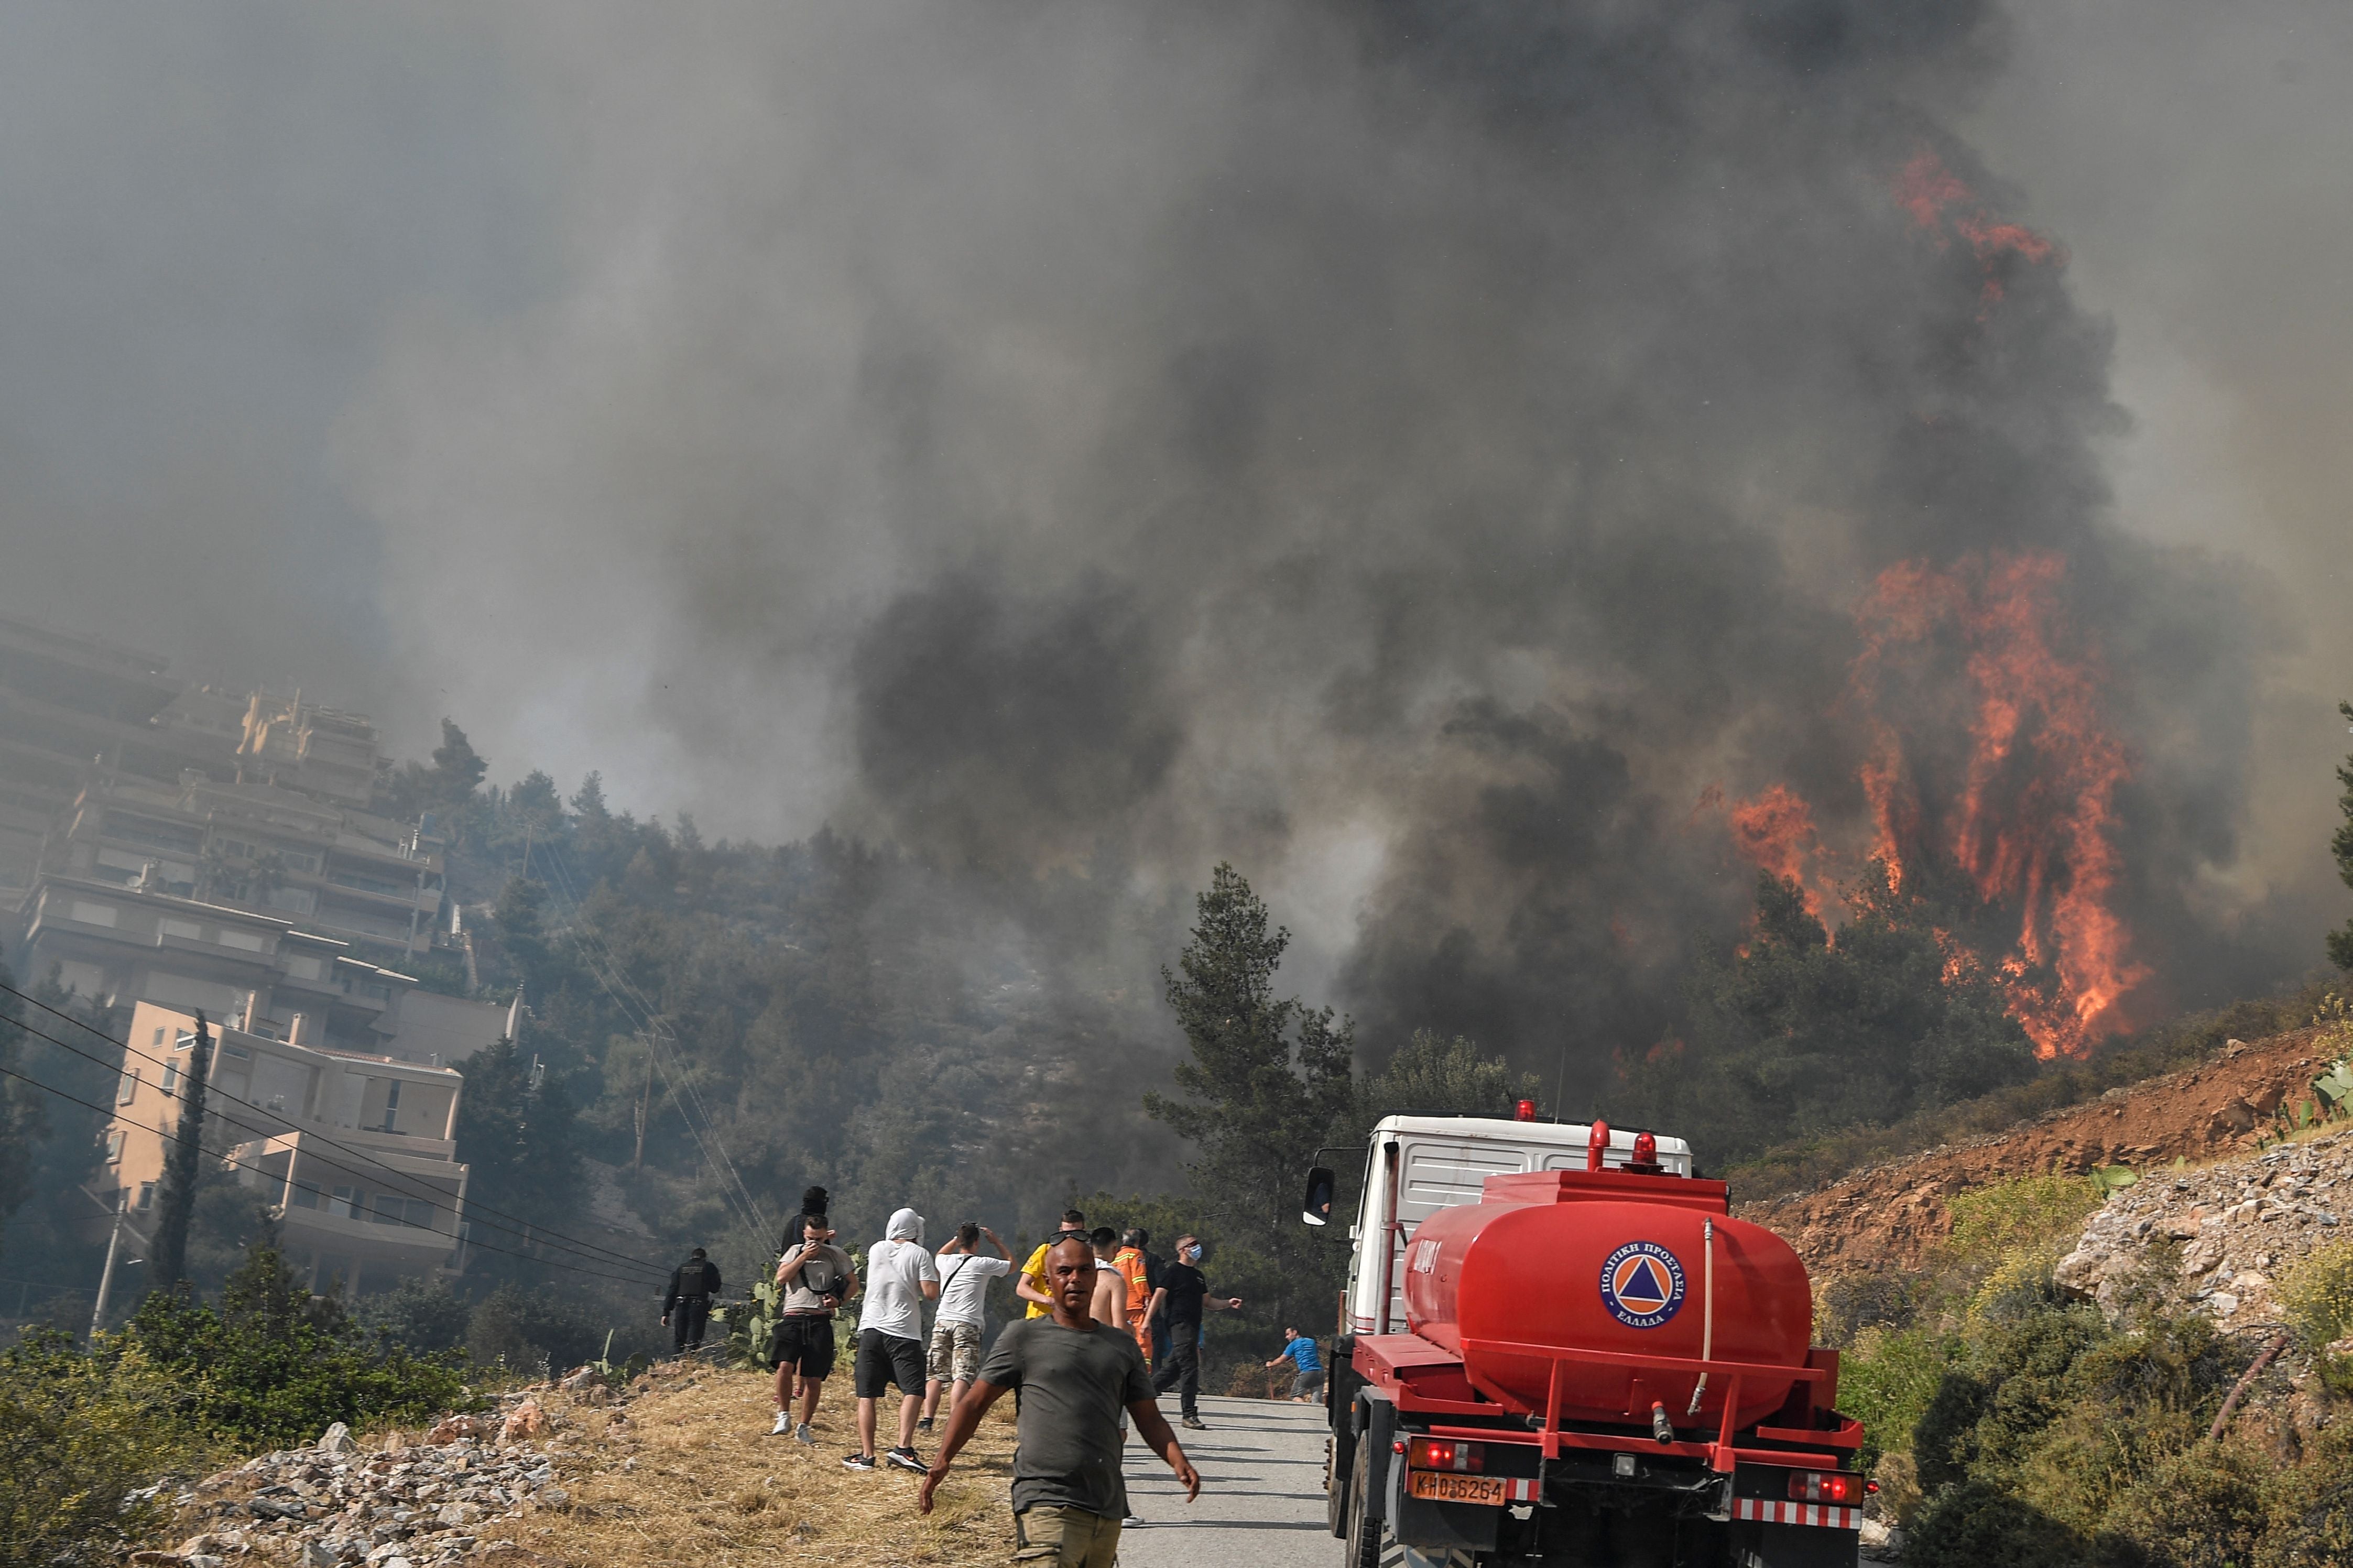 Strong winds fanned the blaze quickly across the slopes of Mount Hymettus which overlooks the Greek capital